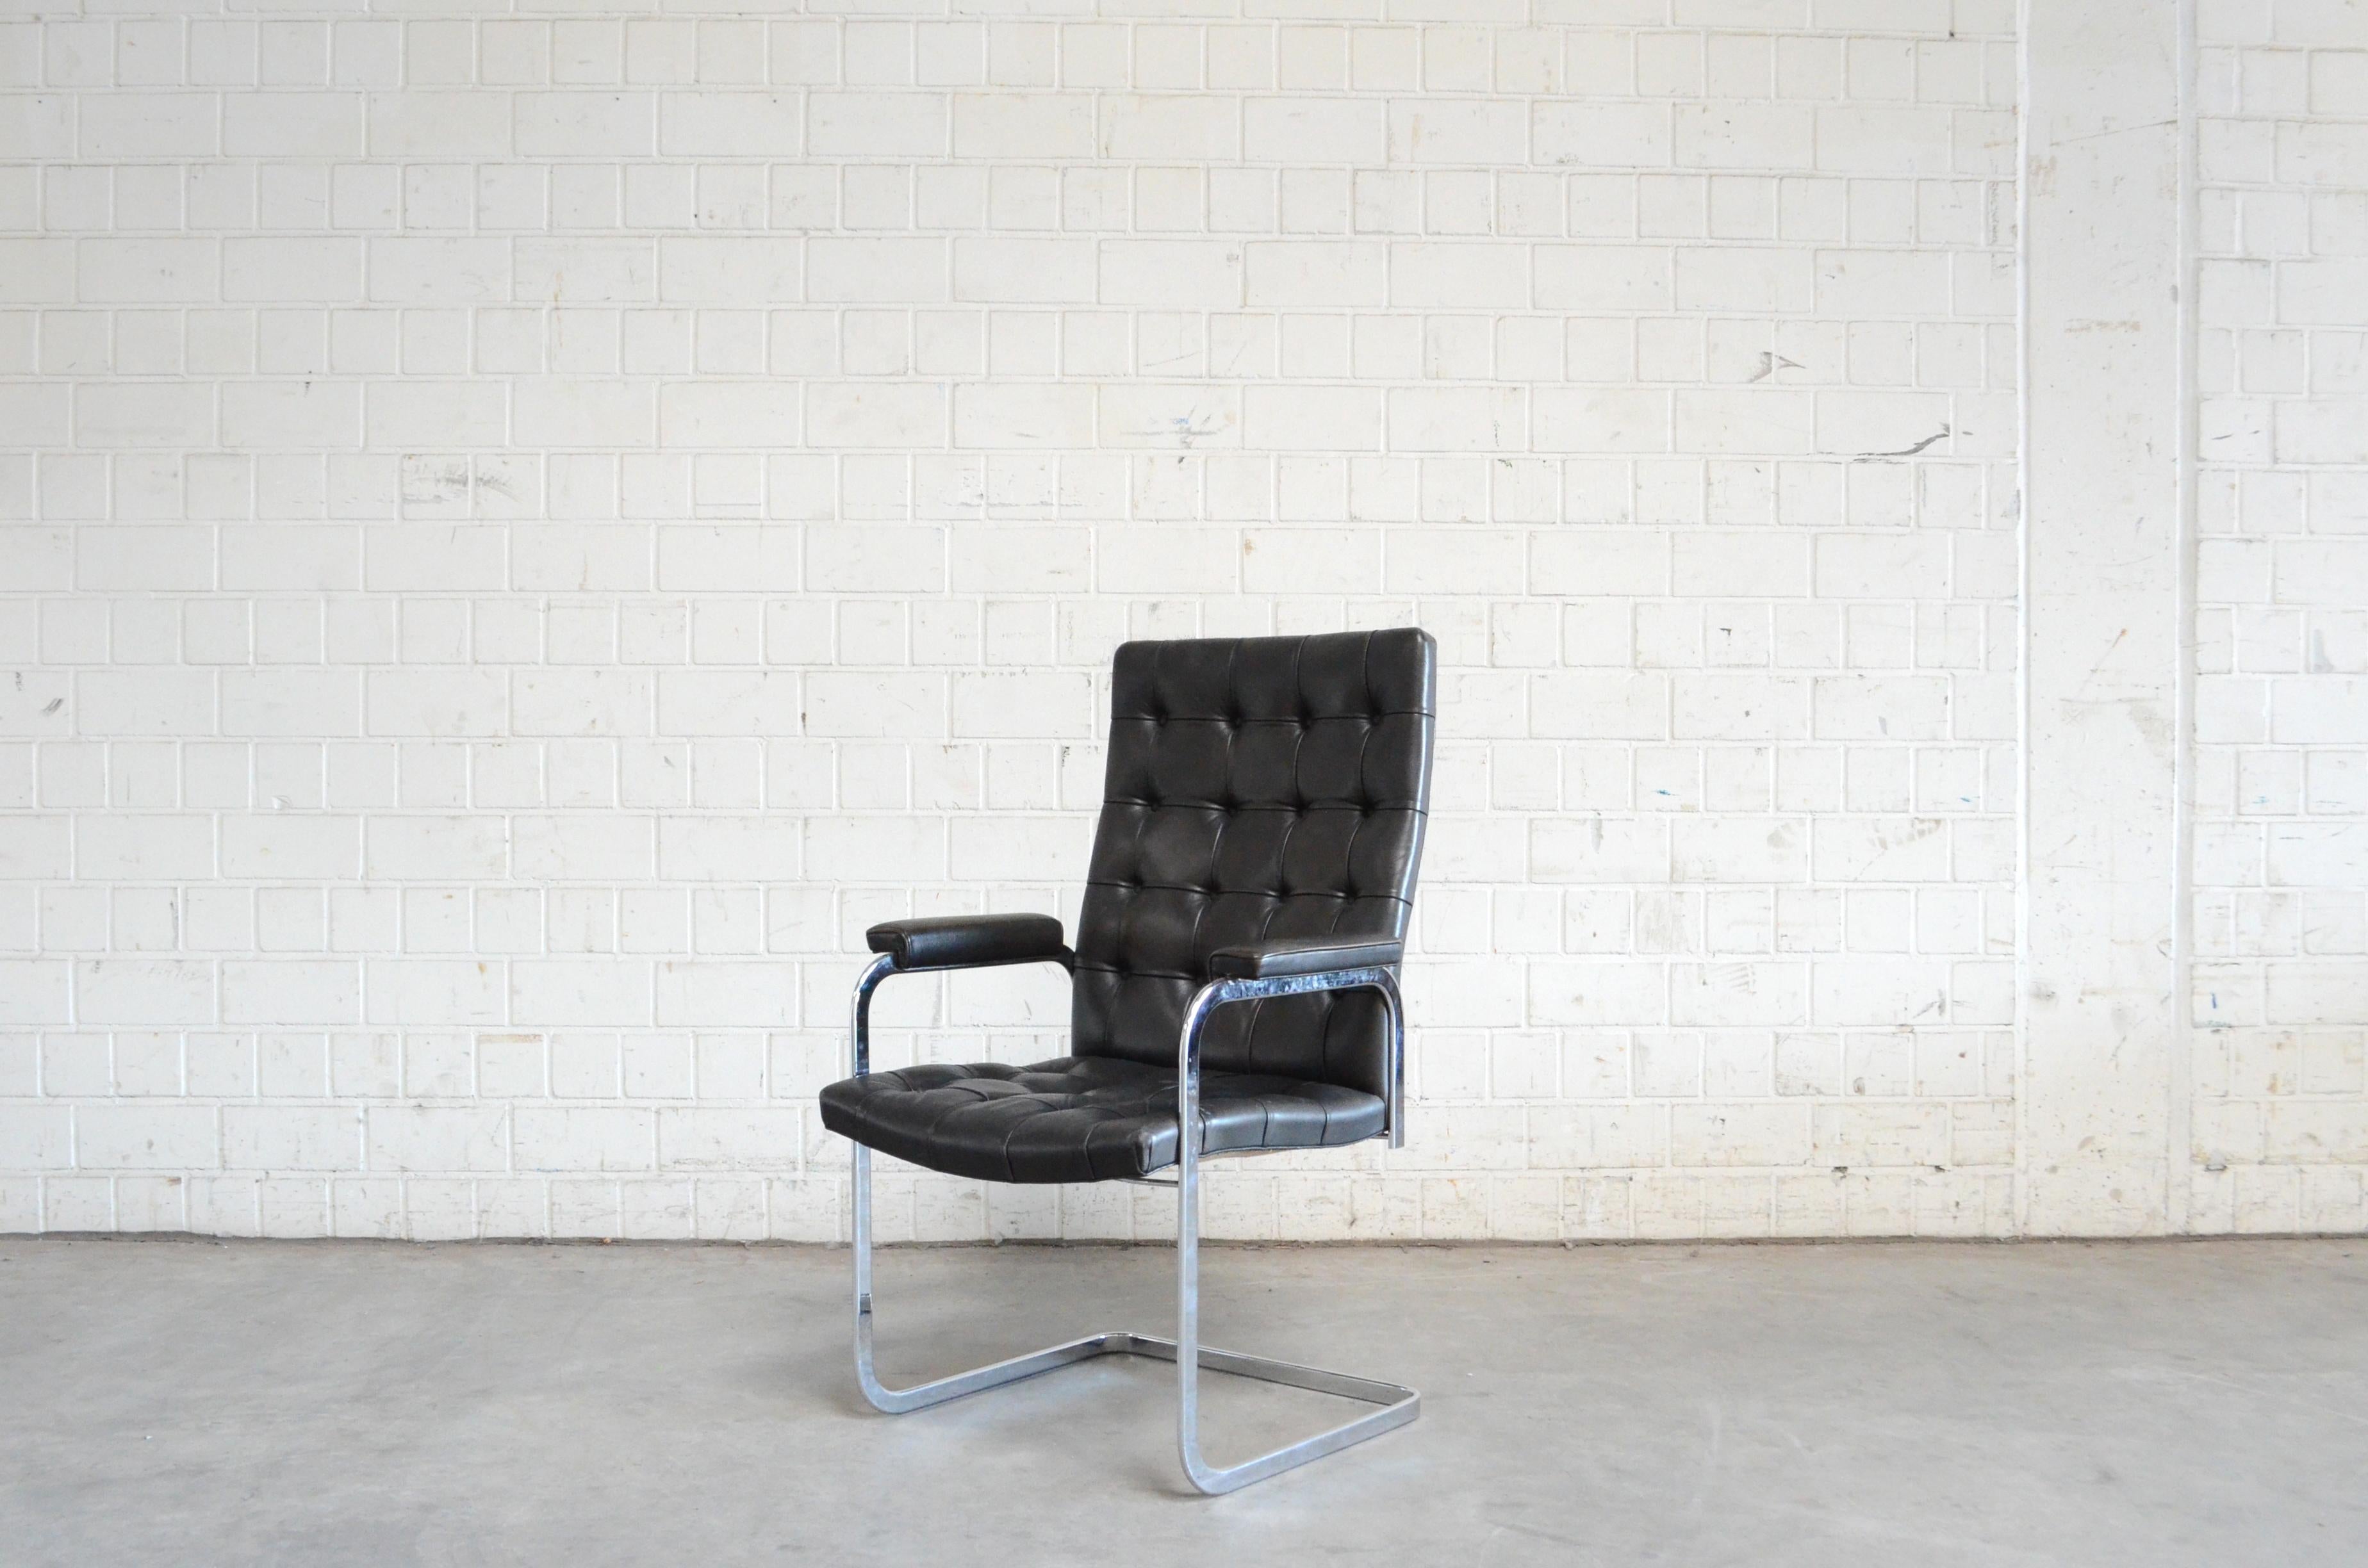 Robert Haussmann RH 305 armchair design of 1957 and manufactured by De Sede.
Black aniline leather an a chrome steel frame.
This is a Classic Swiss design chair in the tufted highback version.
Great condition.
Price for 1 Chair.
   